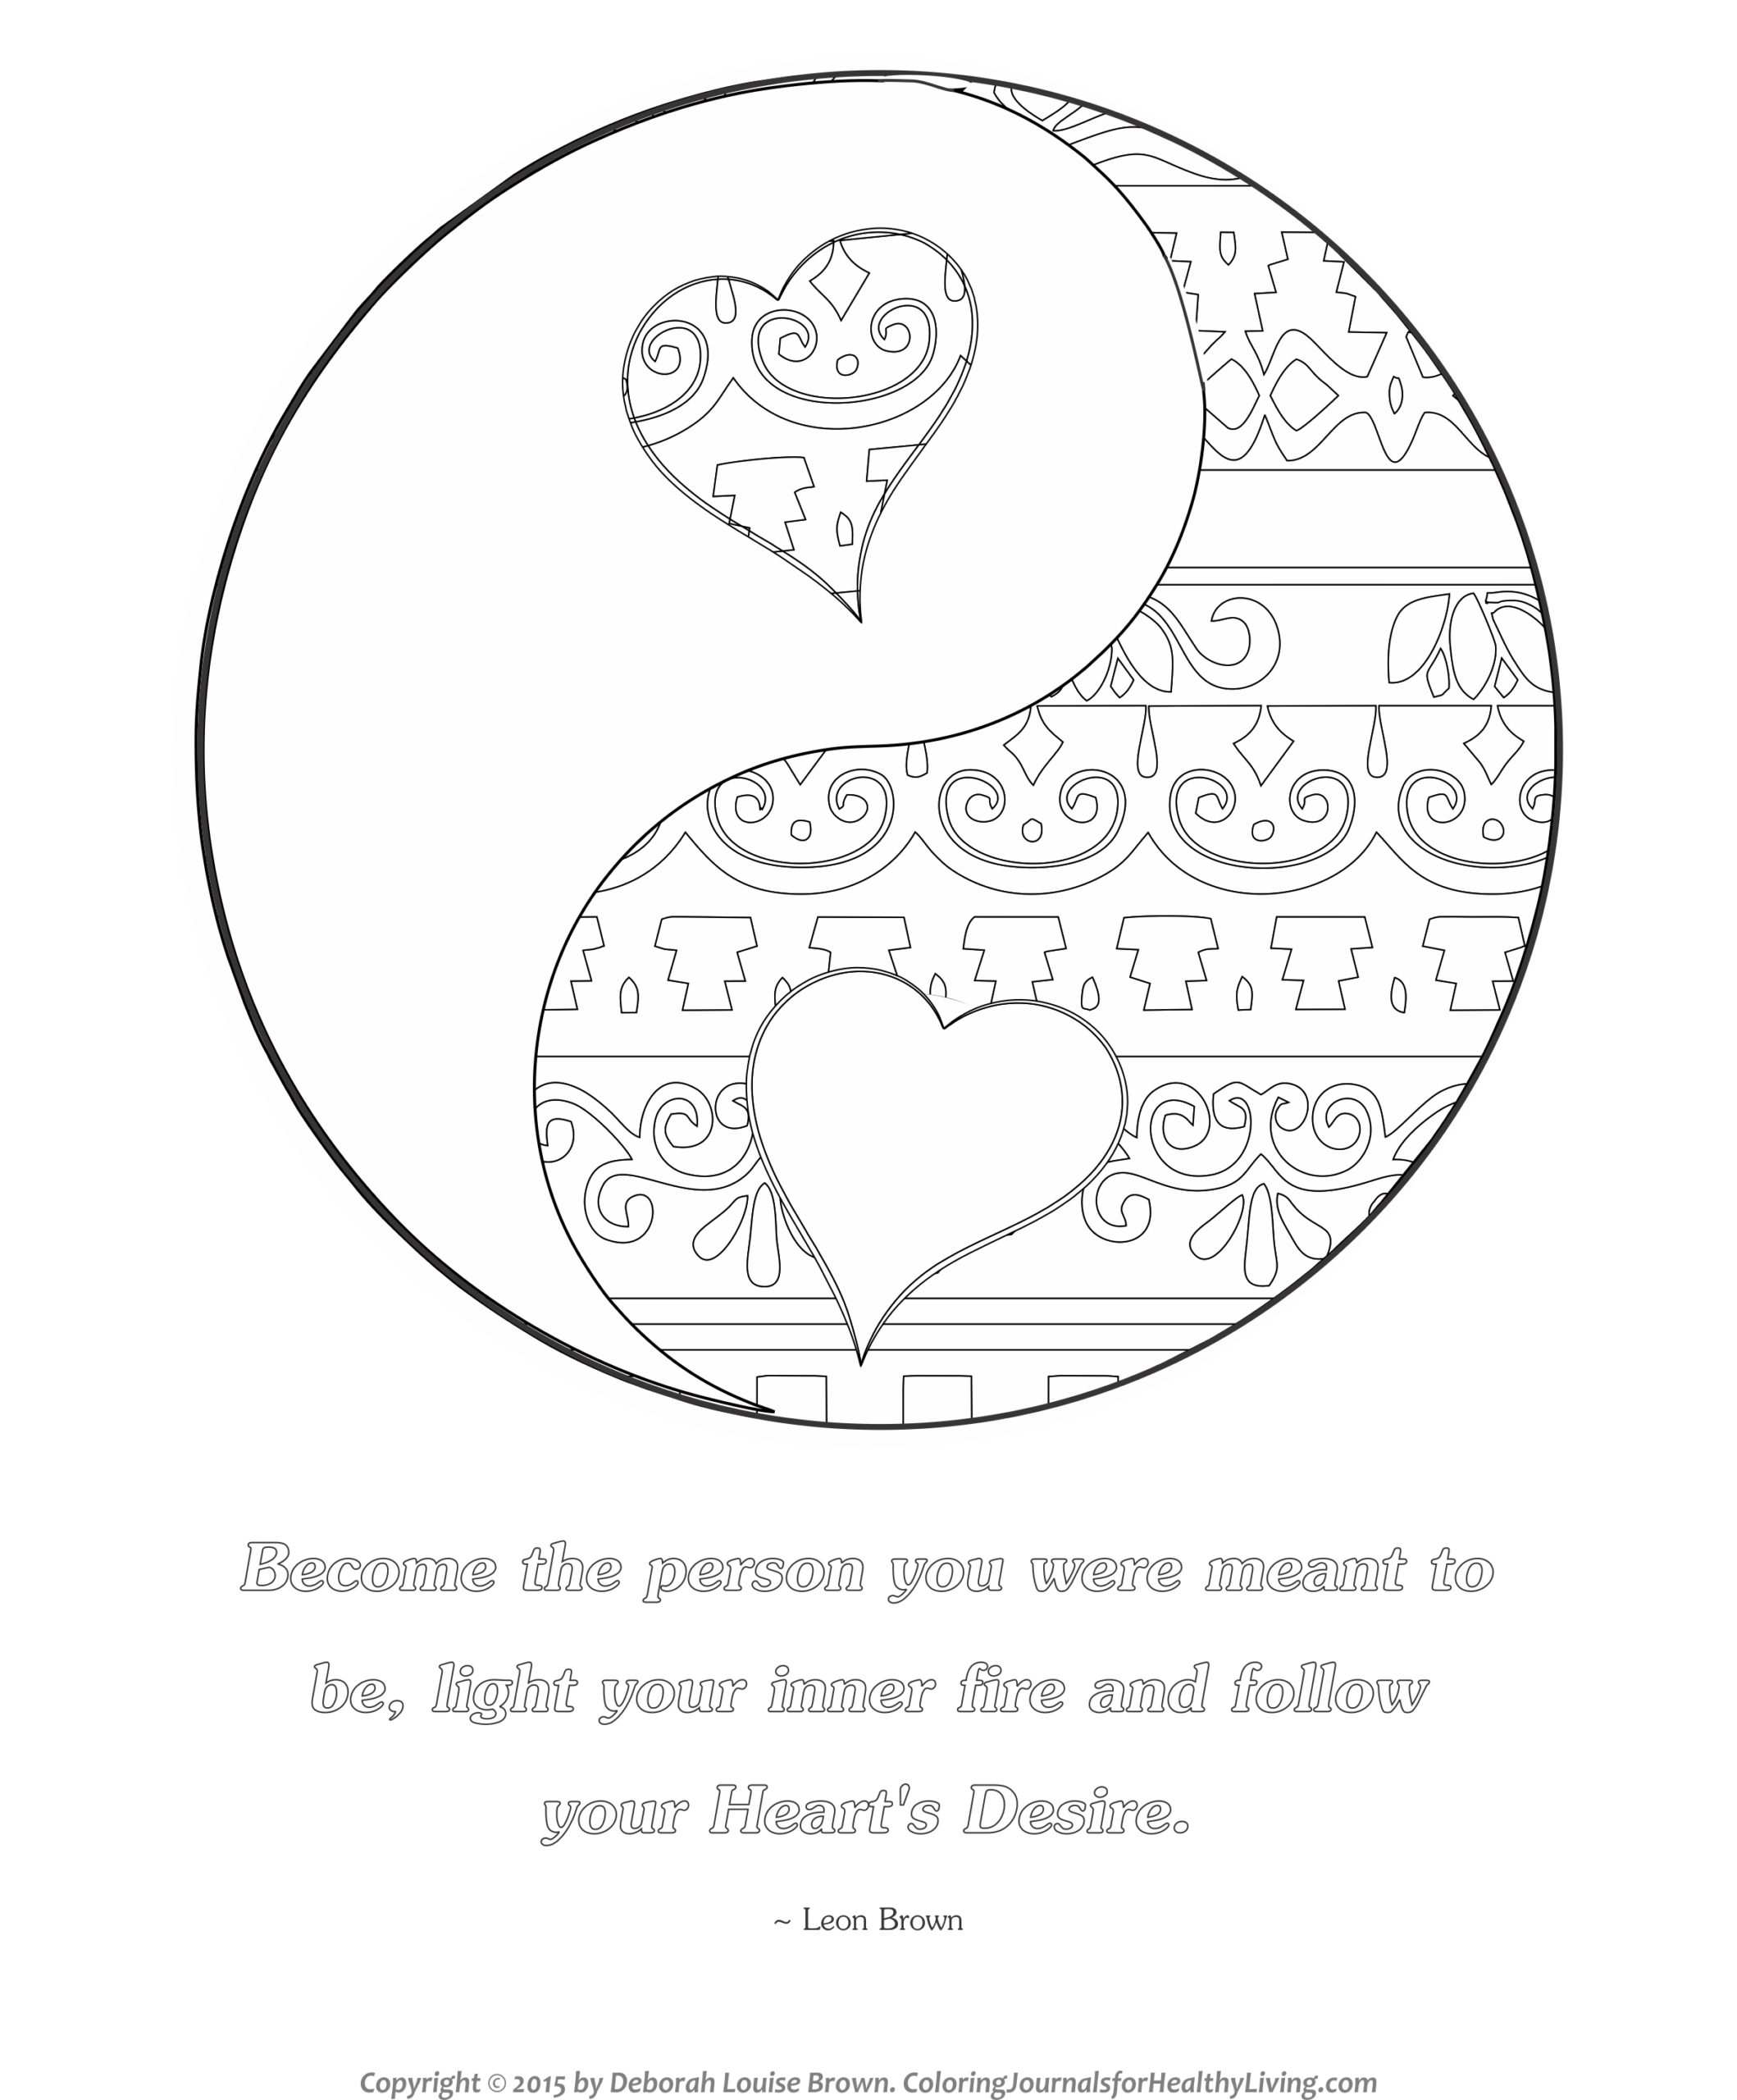 Coloring Pages : Free Coloring Journals For Healthy Living Heart ...